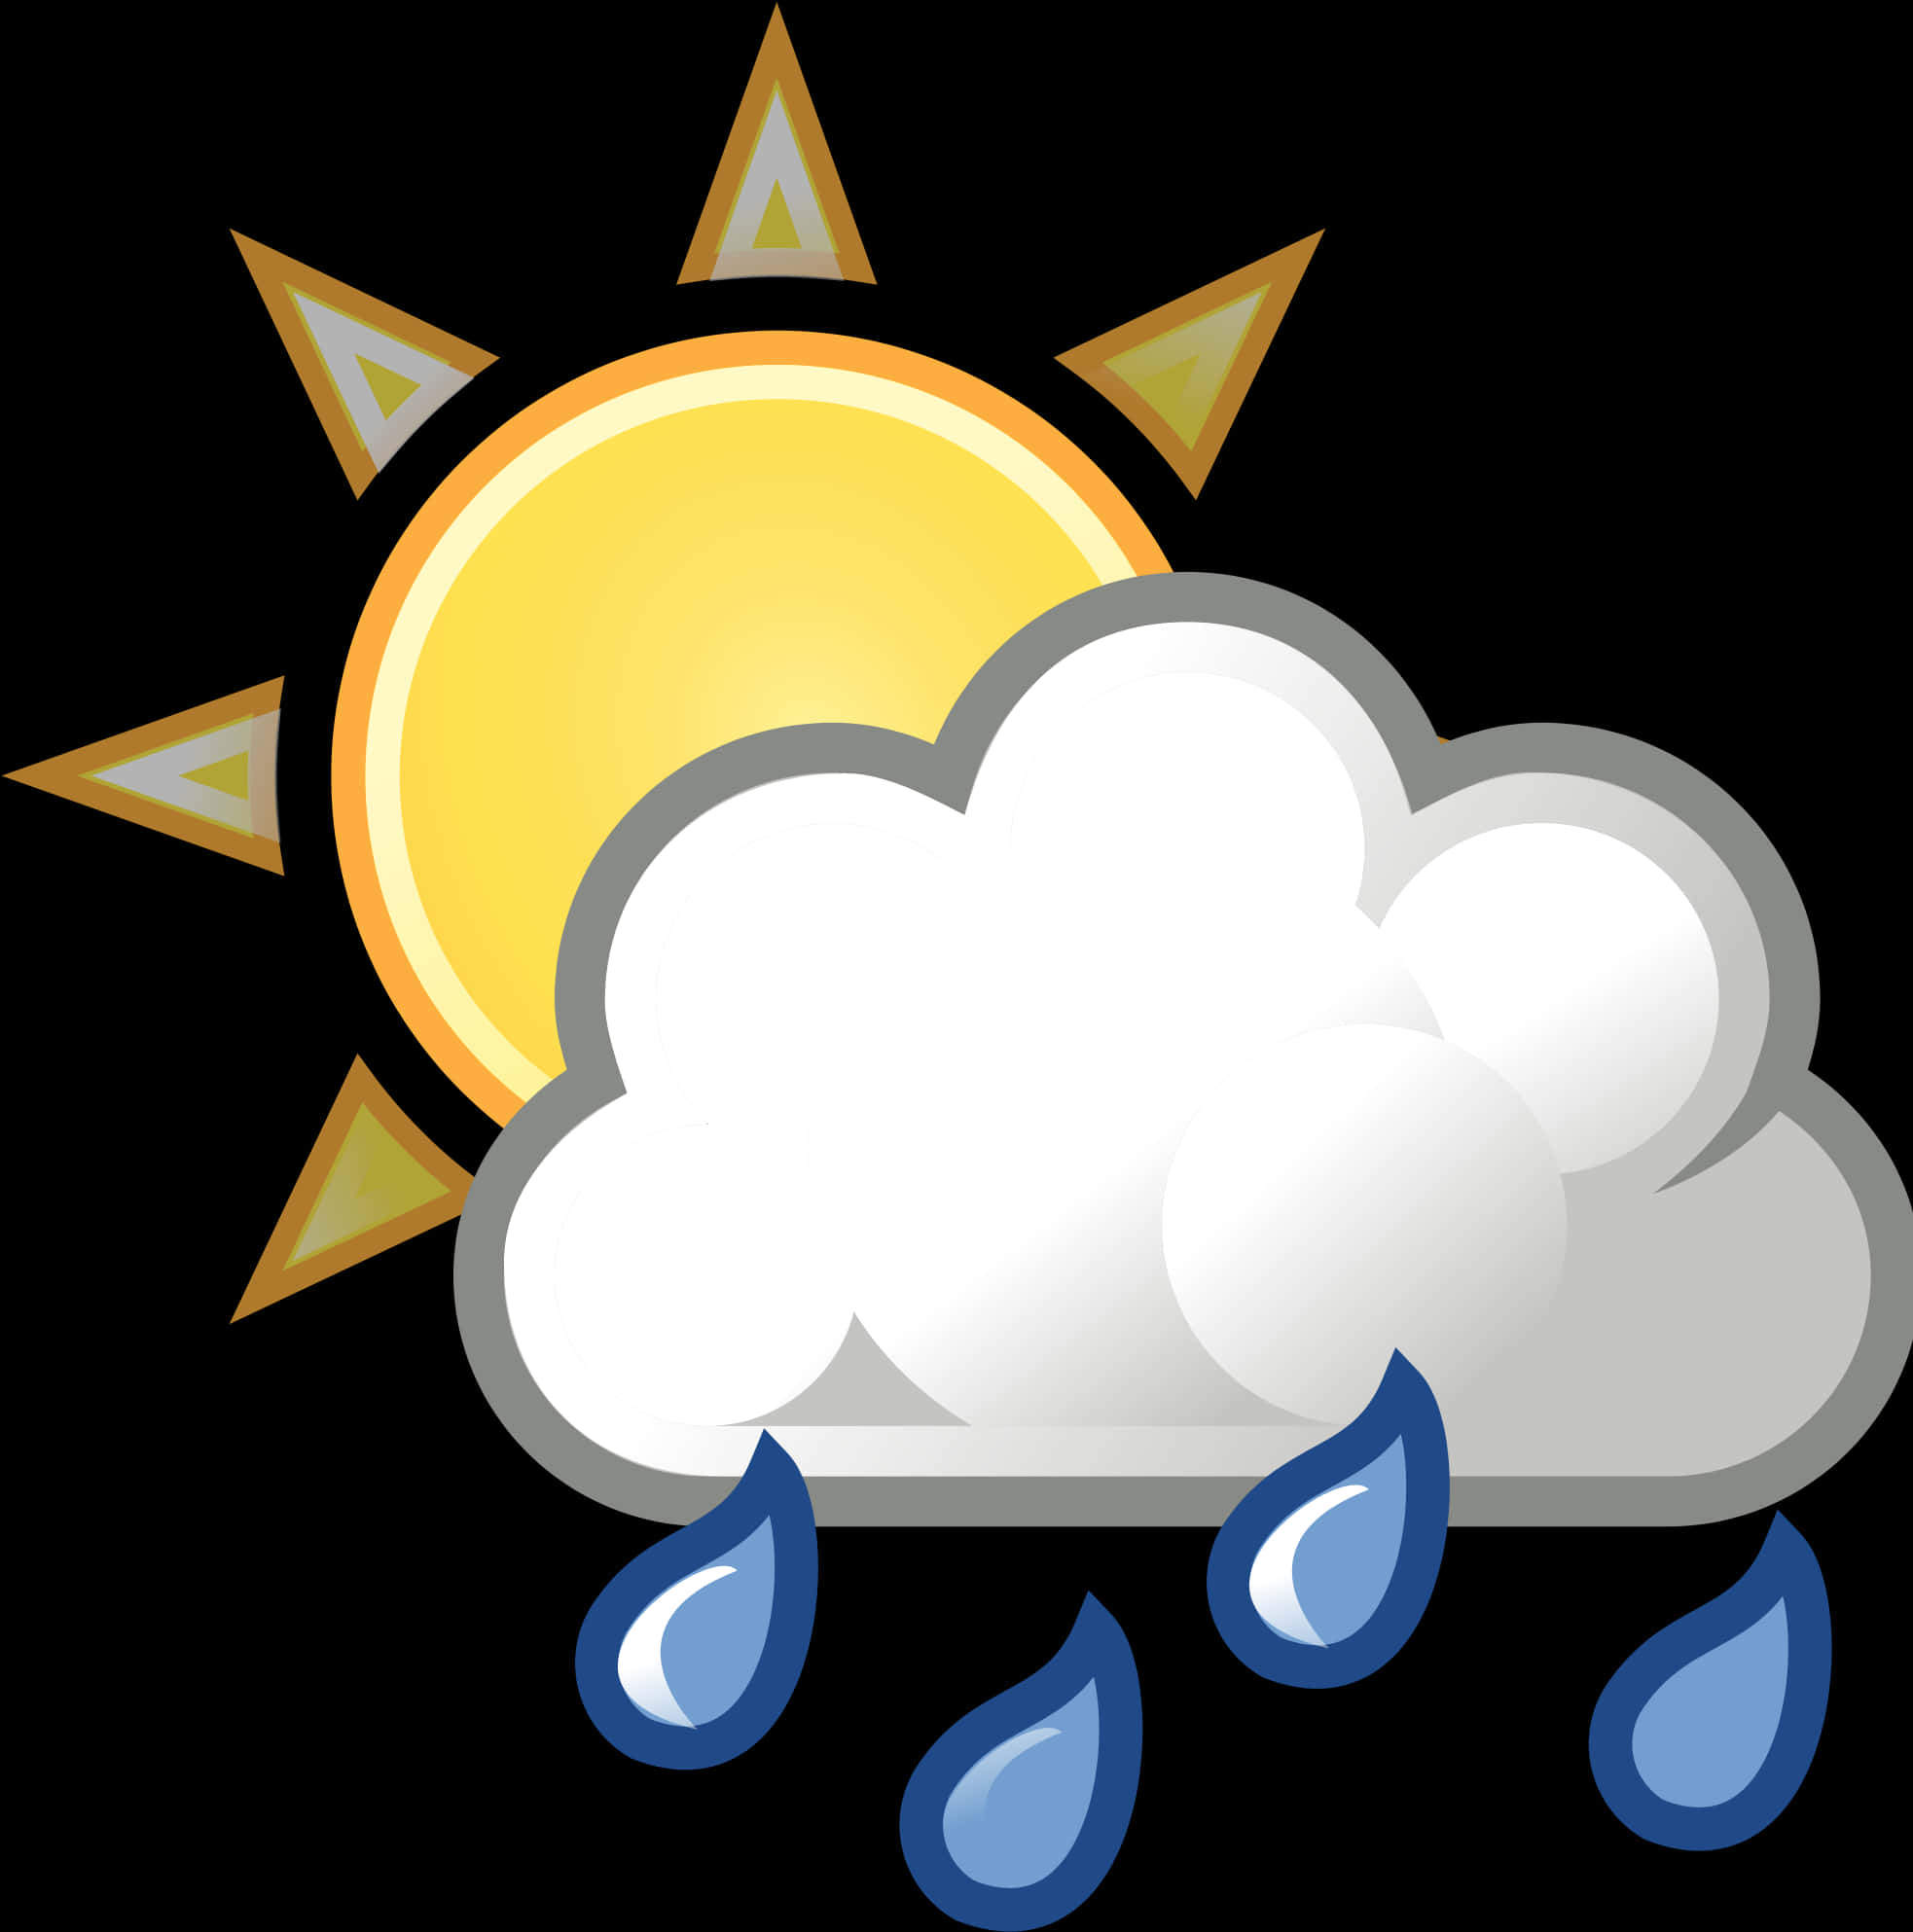 Partly Cloudy With Rainand Sunshine PNG